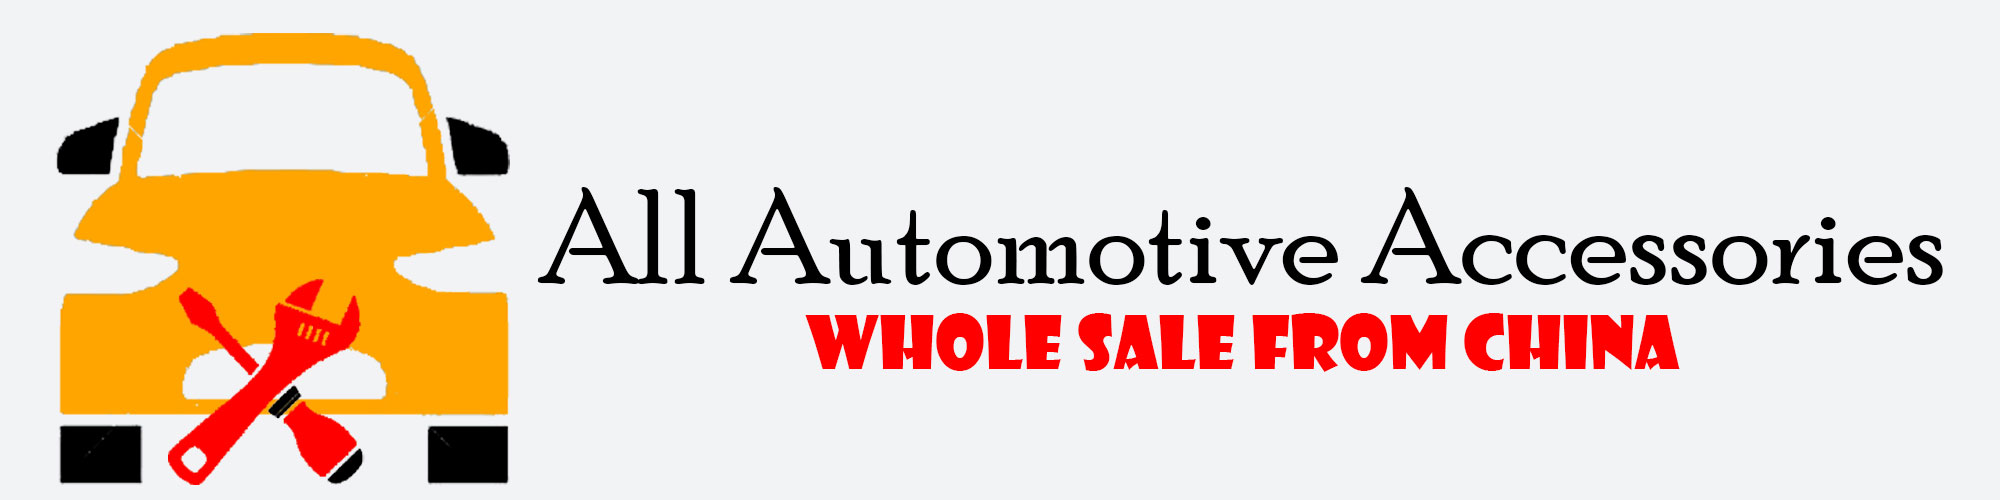 All Automotive Accessories - Wholesale From China